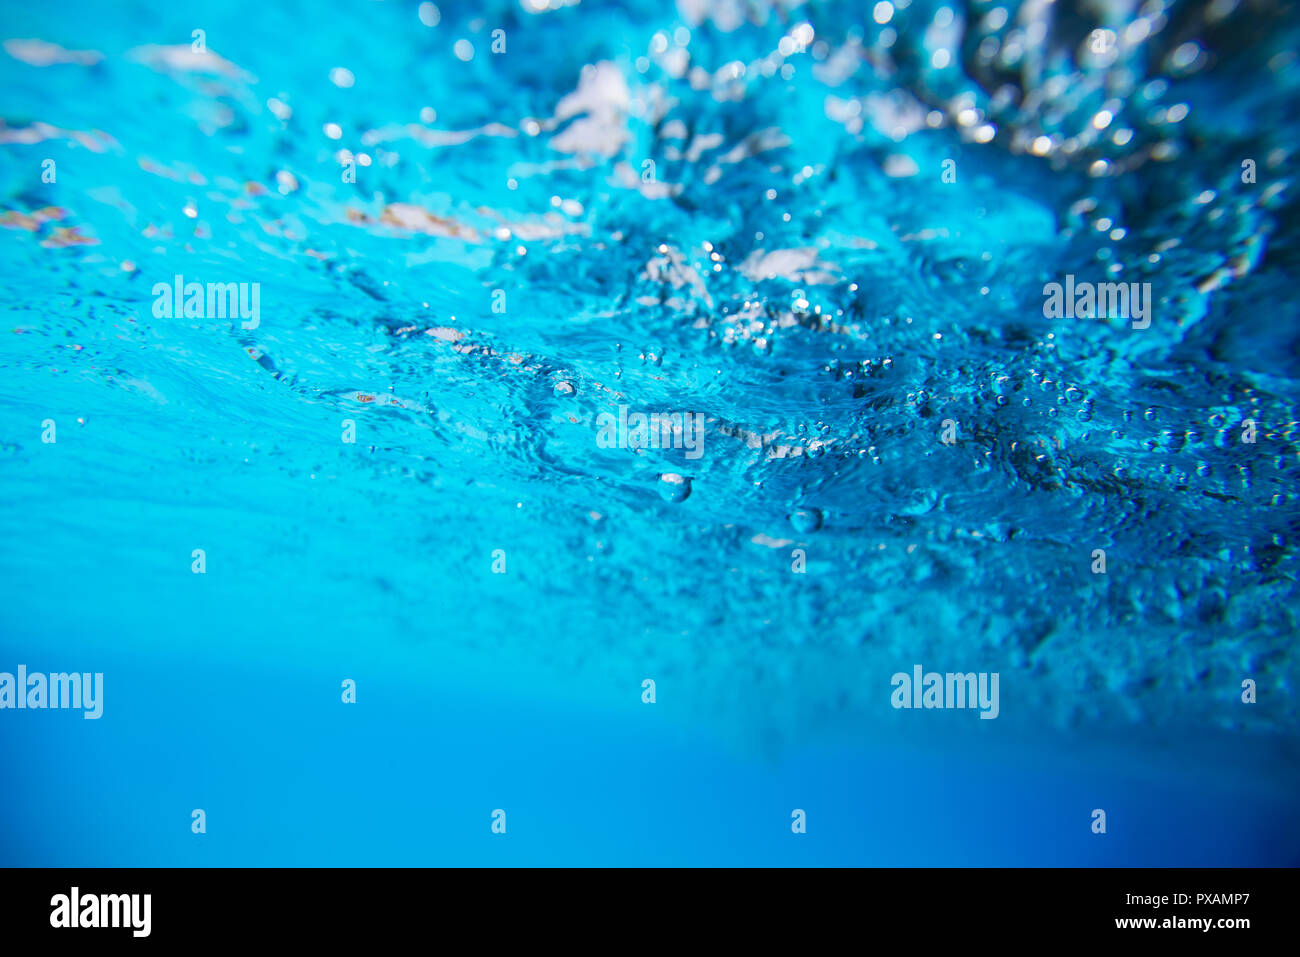 surface water view from underwater Stock Photo